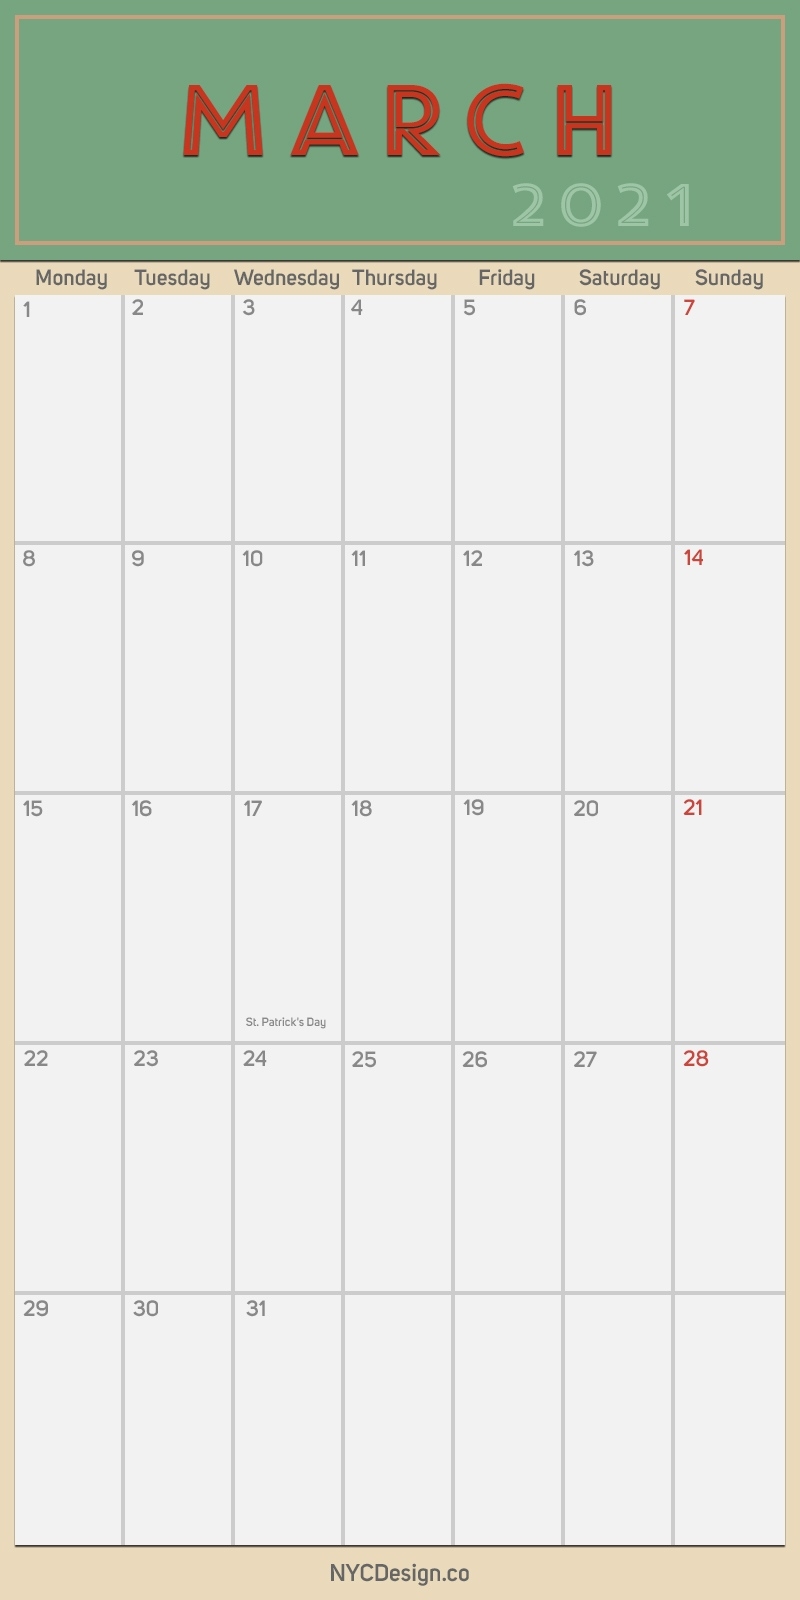 2021 March - Monthly Calendar With Holidays, Printable Free, Pdf - Monday Start - Nycdesign.co July 2021 Calendar Monday Start